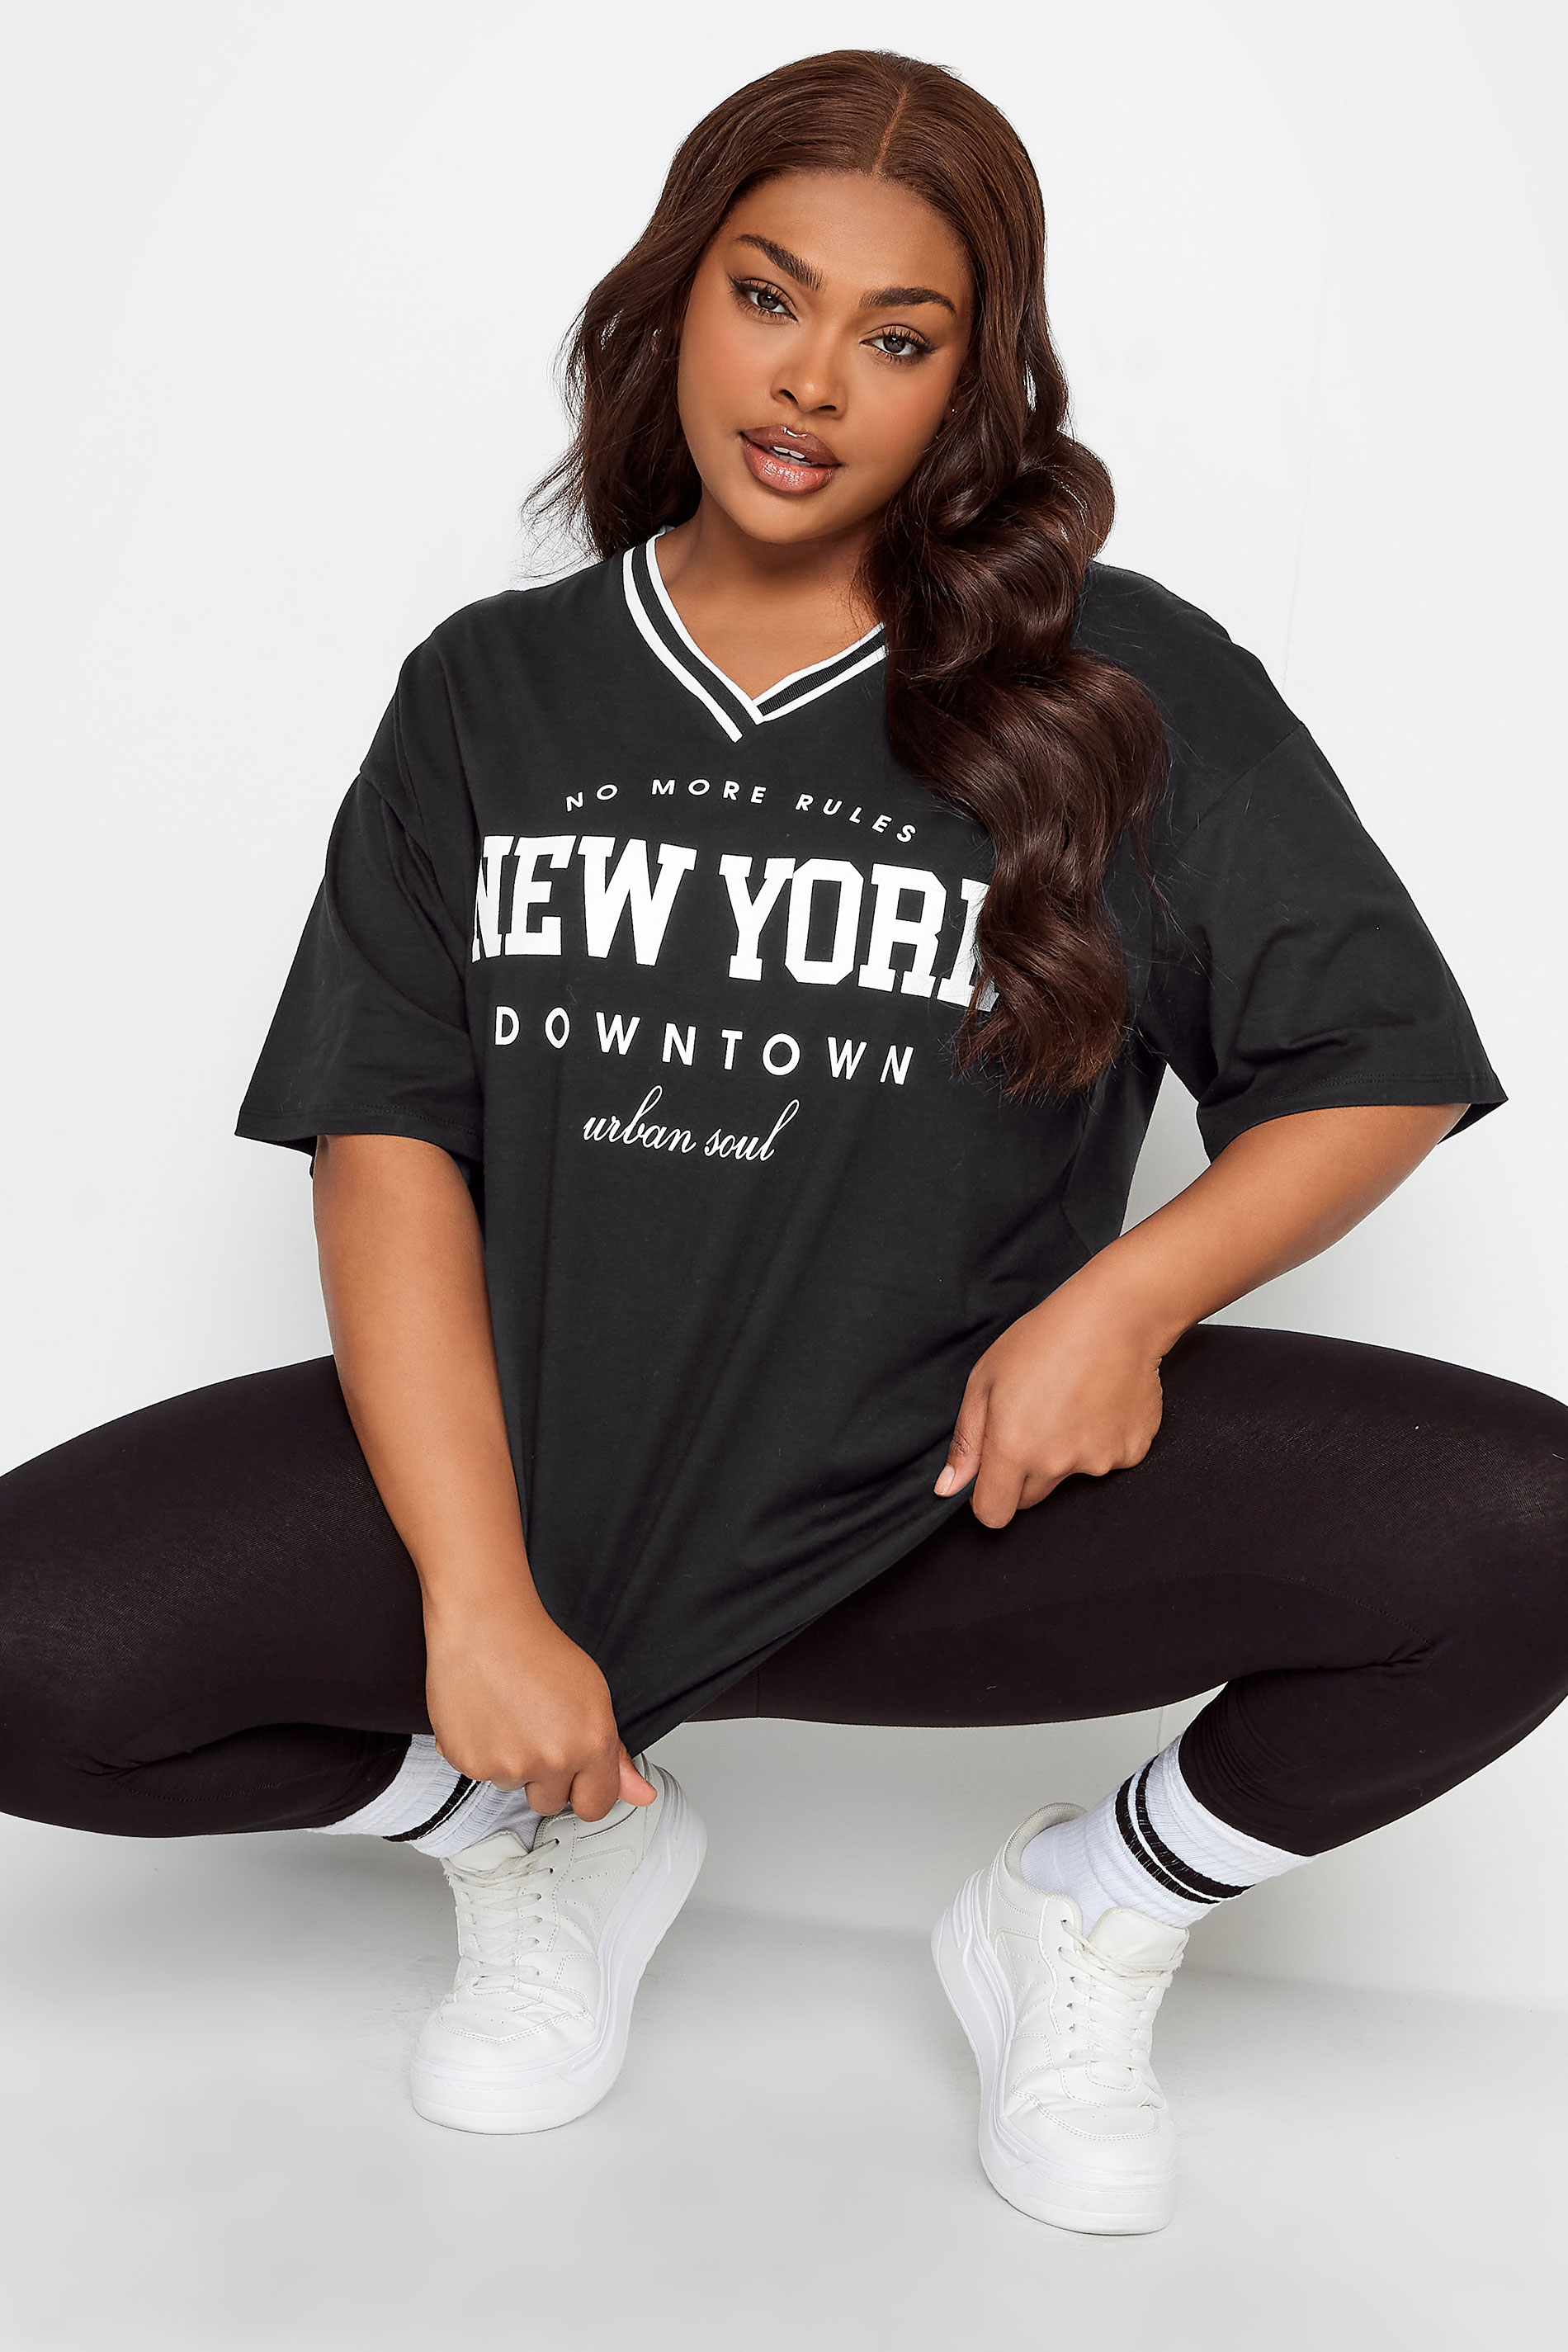 Product Video For YOURS Plus Size Black 'New York' Slogan V-Neck T-Shirt | Yours Clothing 1